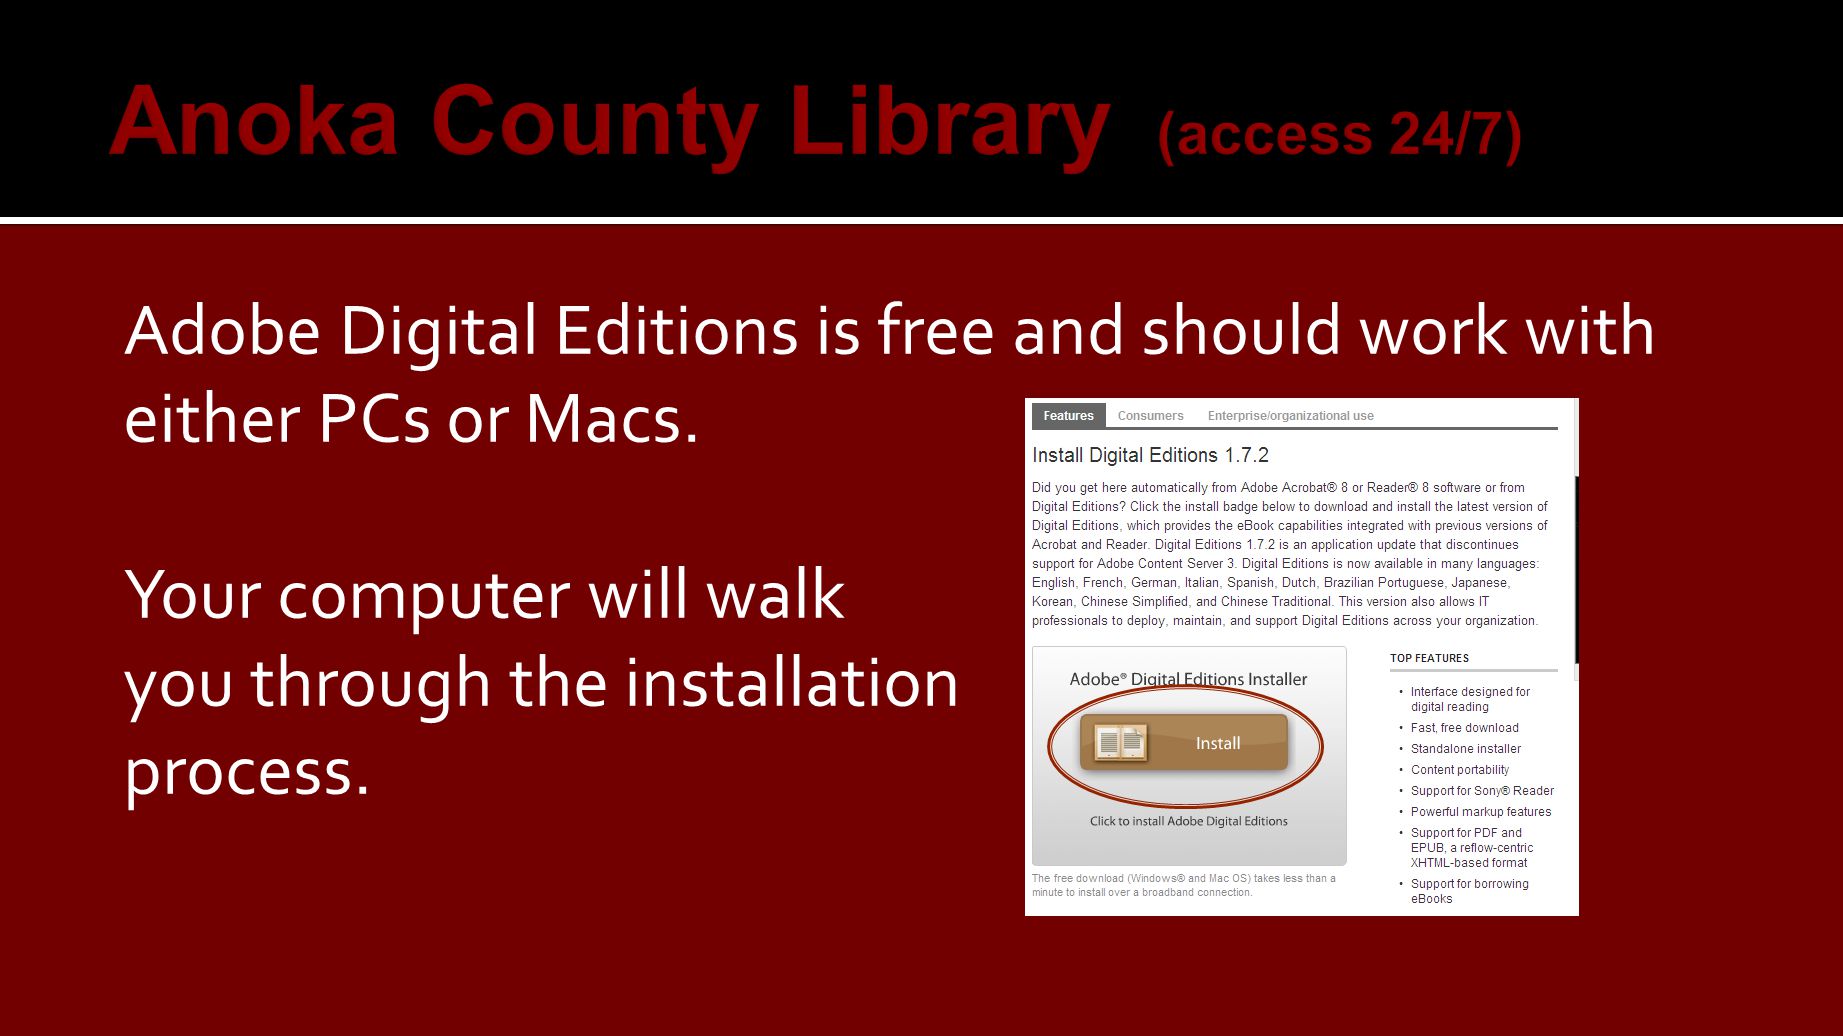 Adobe Digital Editions is free and should work with either PCs or Macs.